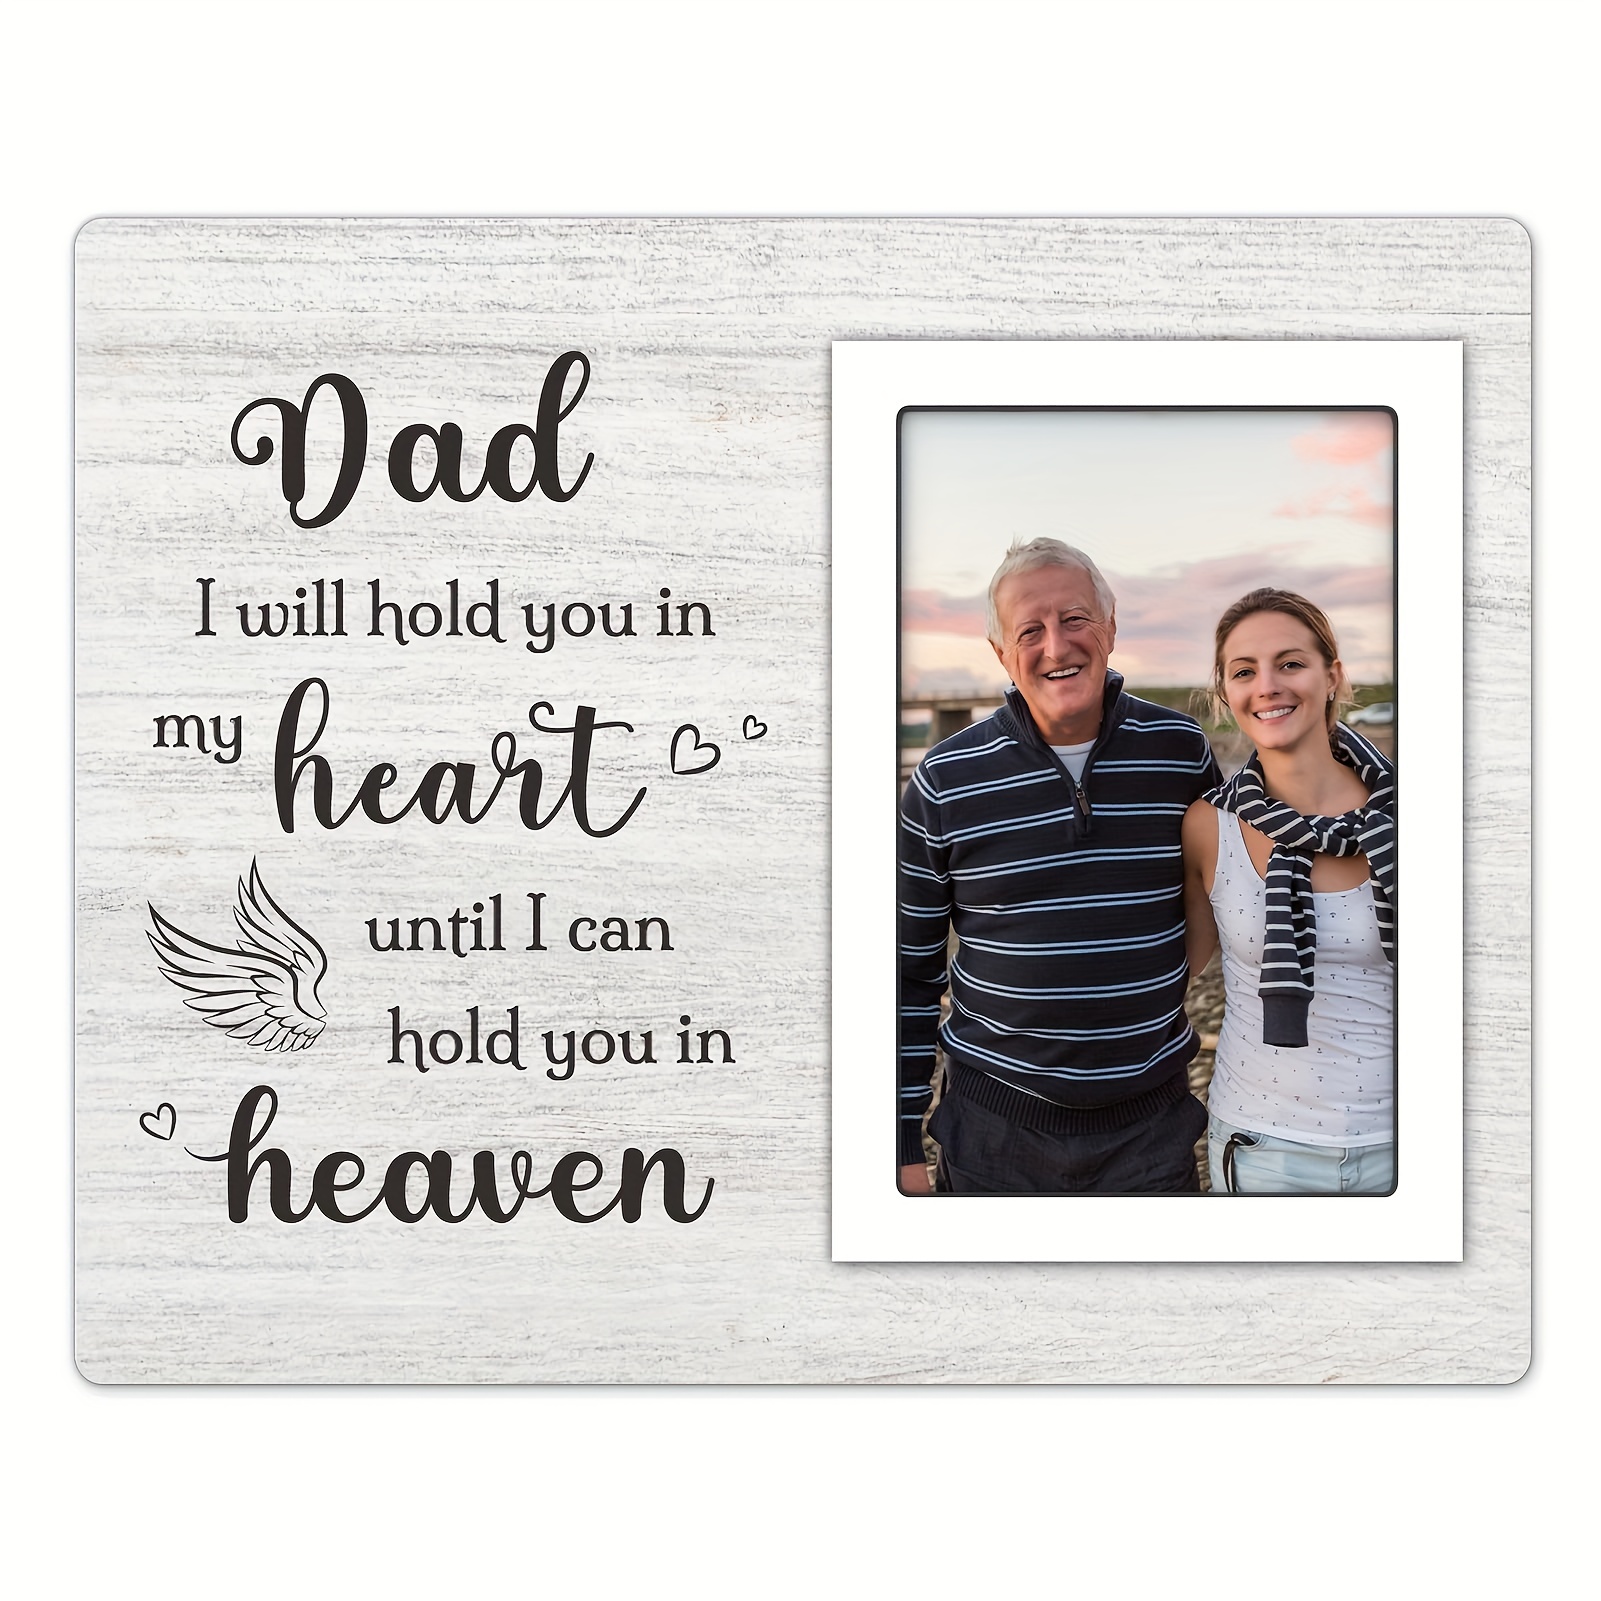  Fishing Memorial Canvas, I thought of You Today, Dad Remembrance,  Memorial Gifts for Loss of Dad, Sympathy Gifts for Loss of Husband, Fishing  in Heaven Personalized Gift